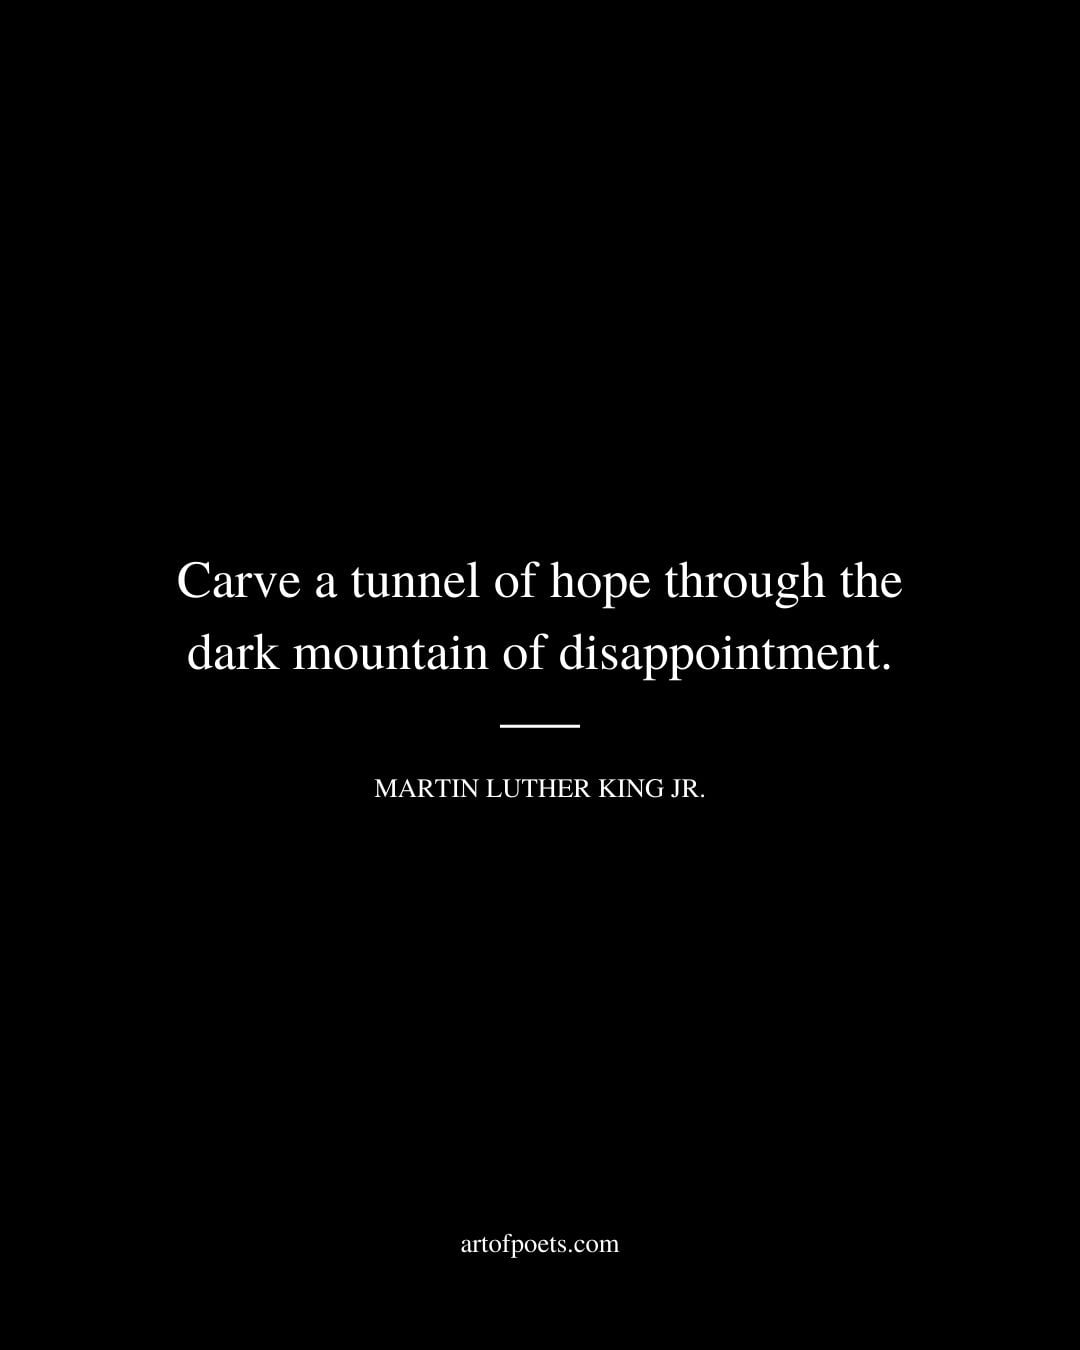 Carve a tunnel of hope through the dark mountain of disappointment. Martin Luther King Jr